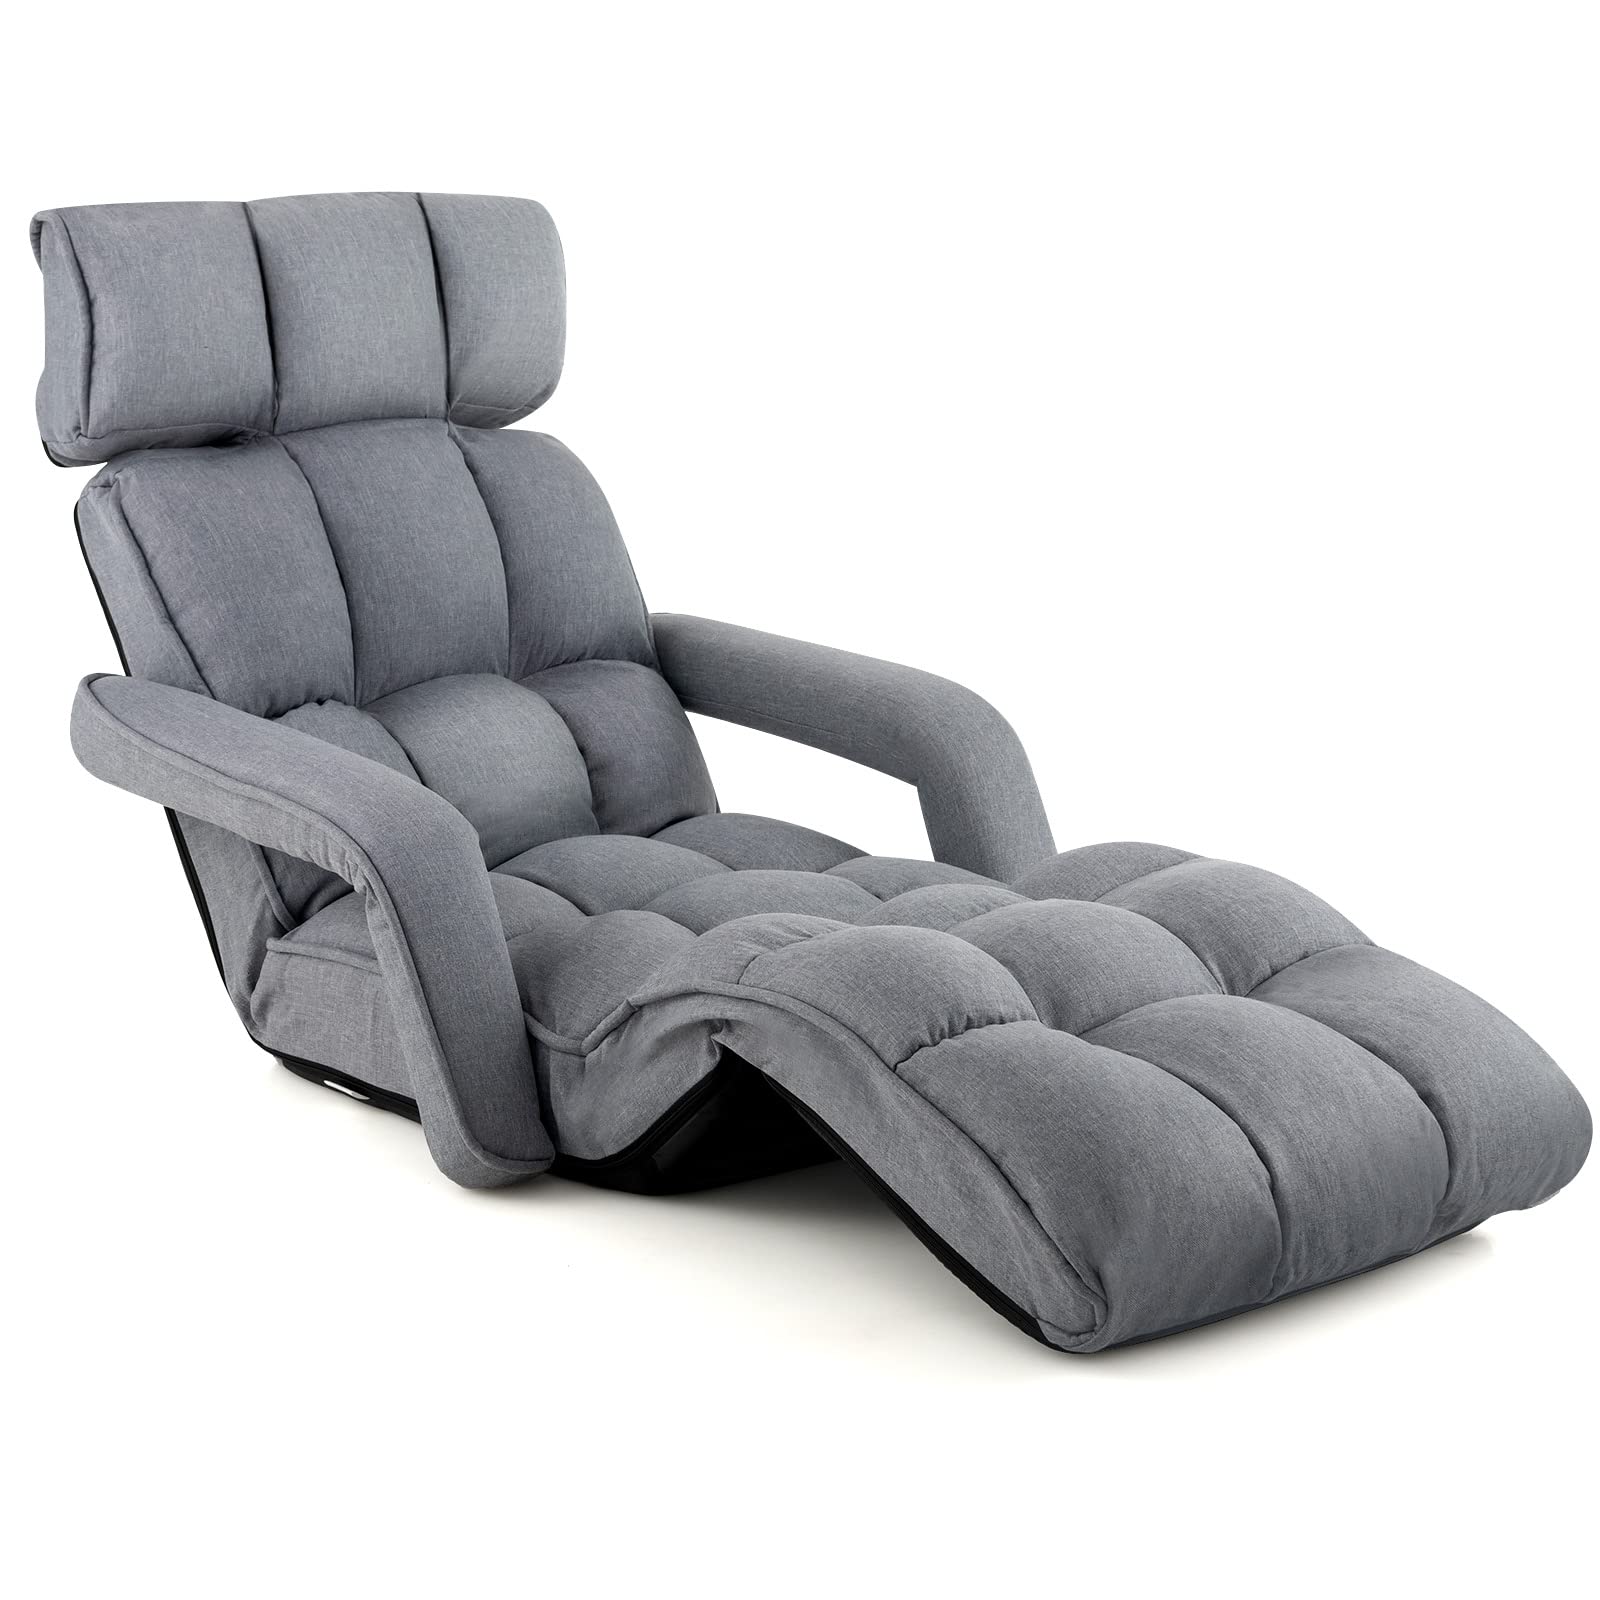 Giantex Foldable Lazy Sofa Bed, 6-Position Adjustable Floor Chair Chaise Lounge with Armrest and Footrest (Gray)